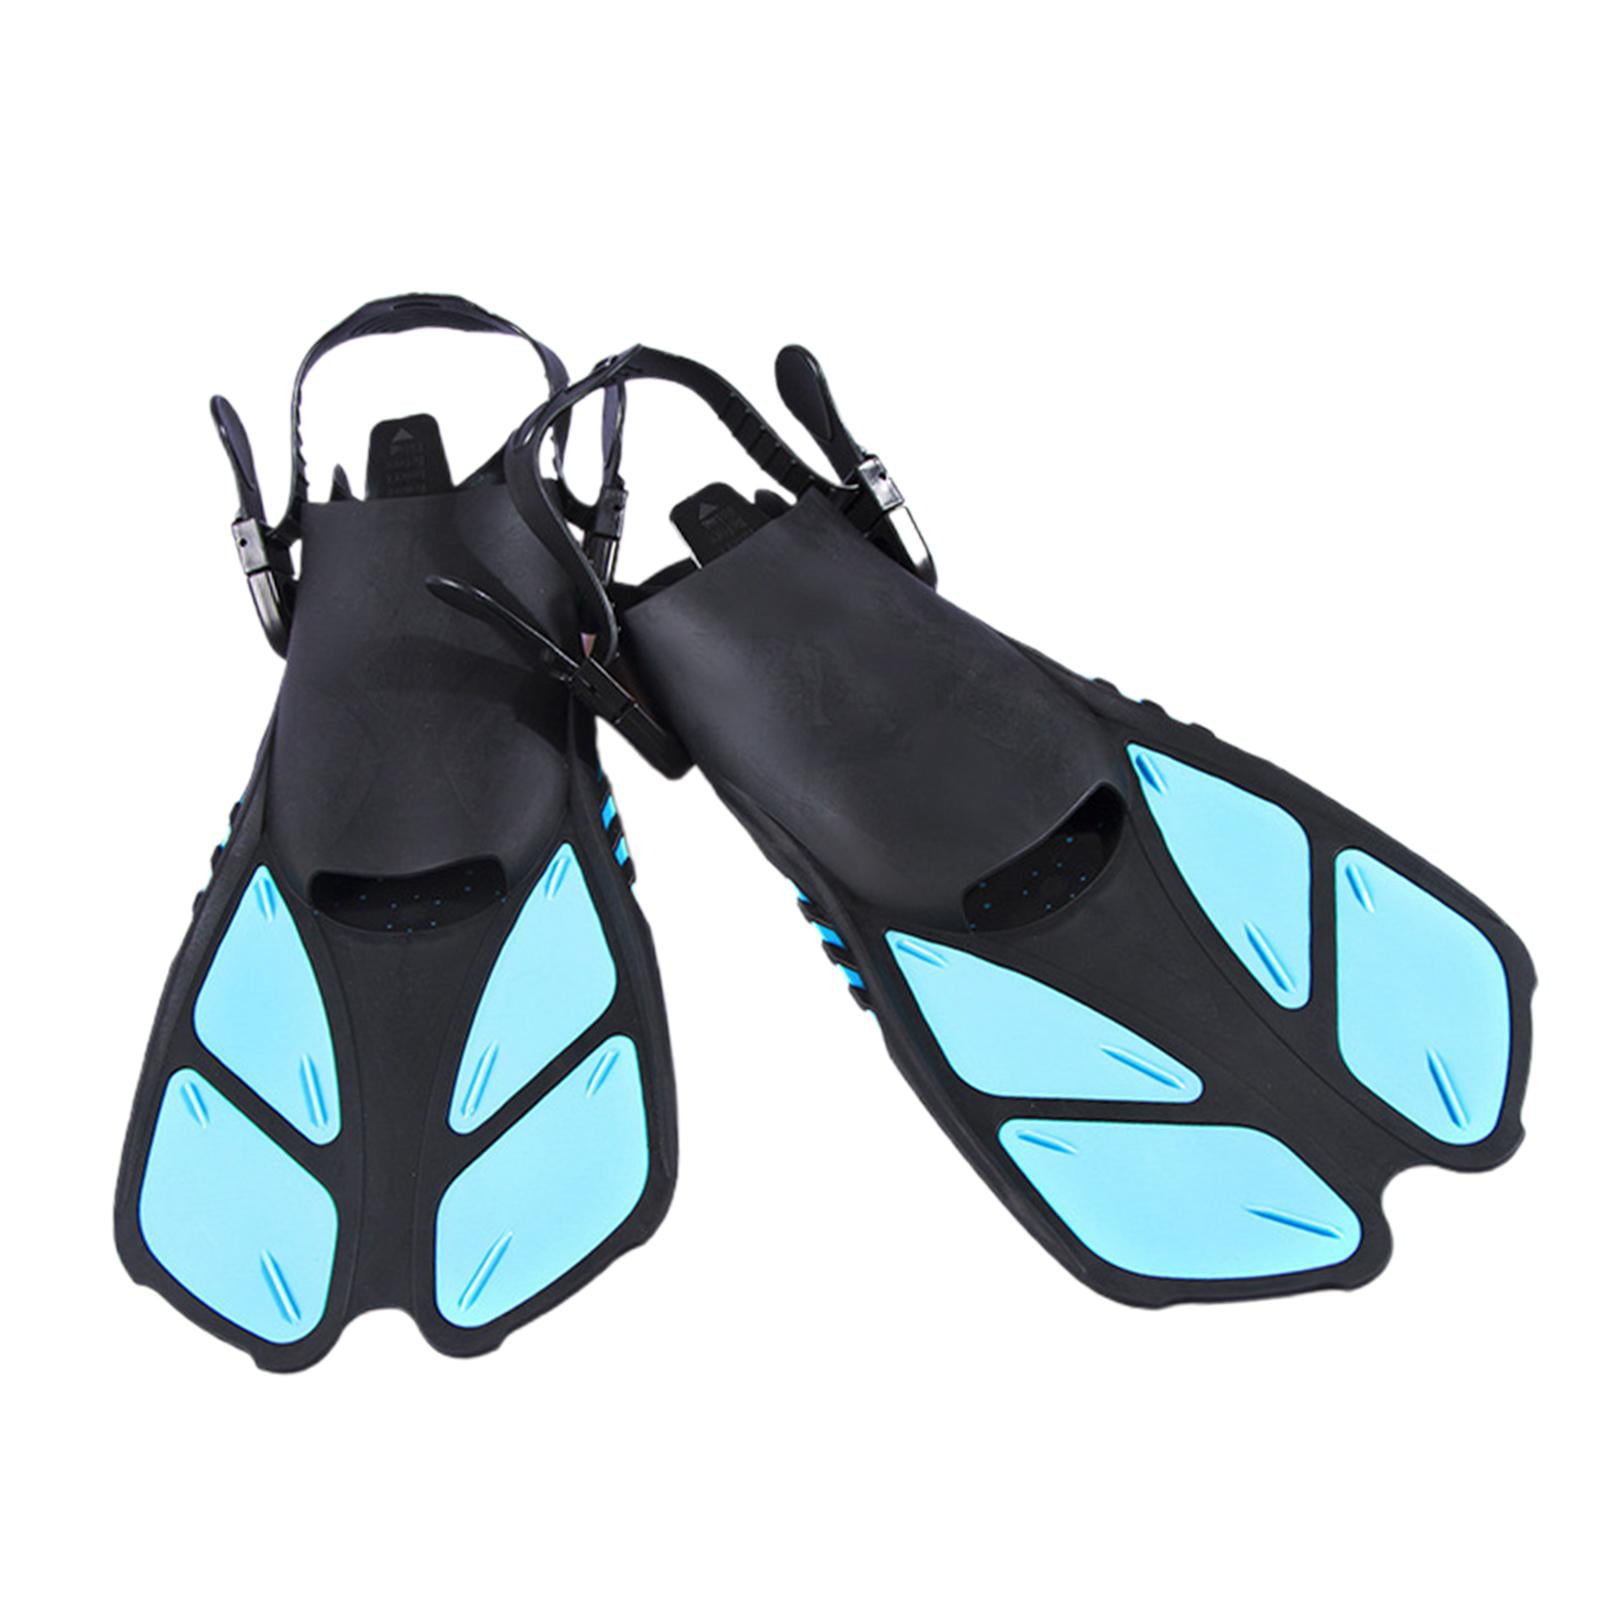 Comfort flippers snorkel feet shoes flippers for training scuba dive 